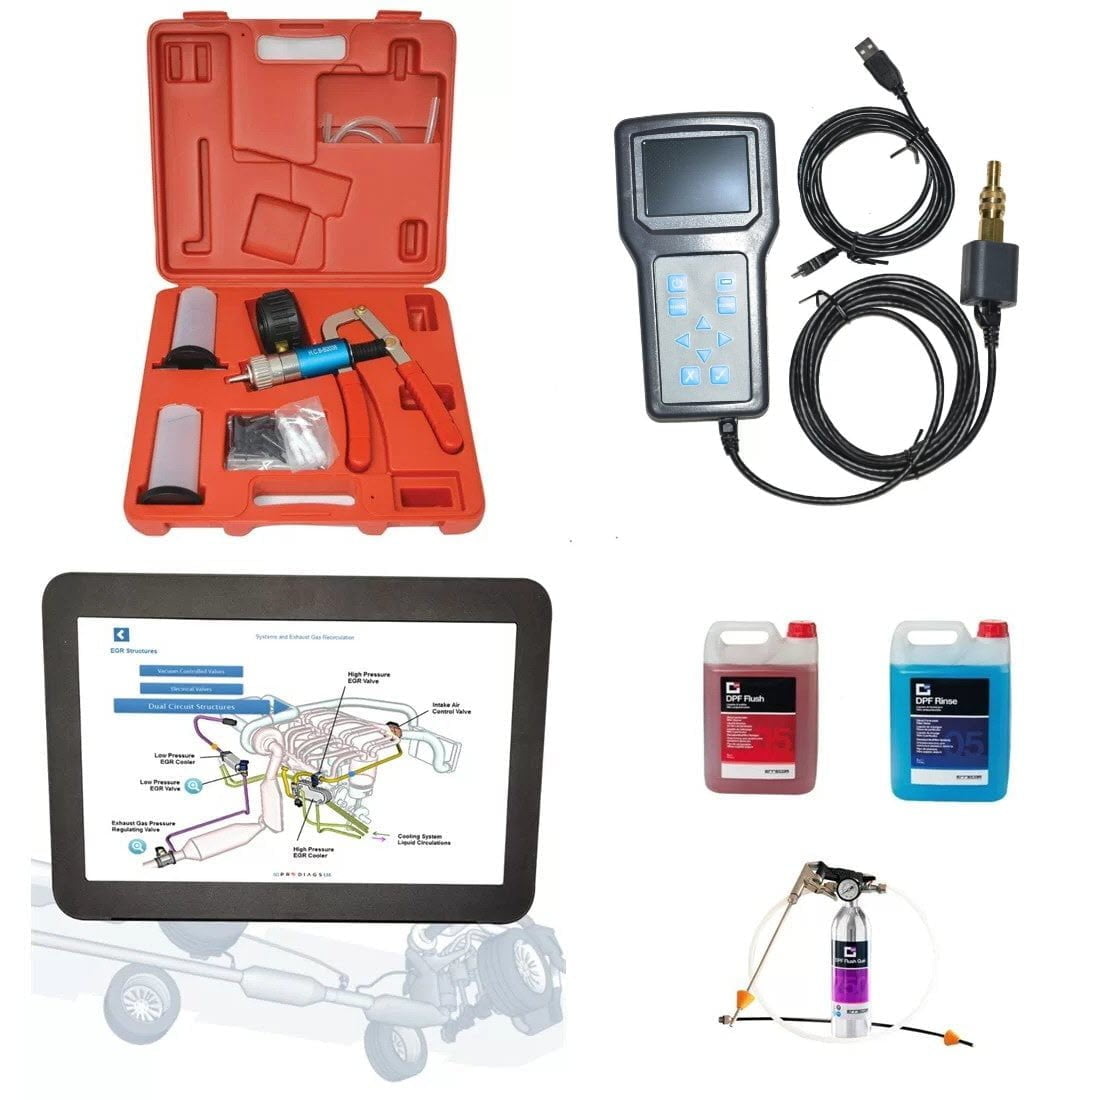 Diagnostic Product, Launch Dpf Products, Launch Dpf Cleaning Fluid, Details